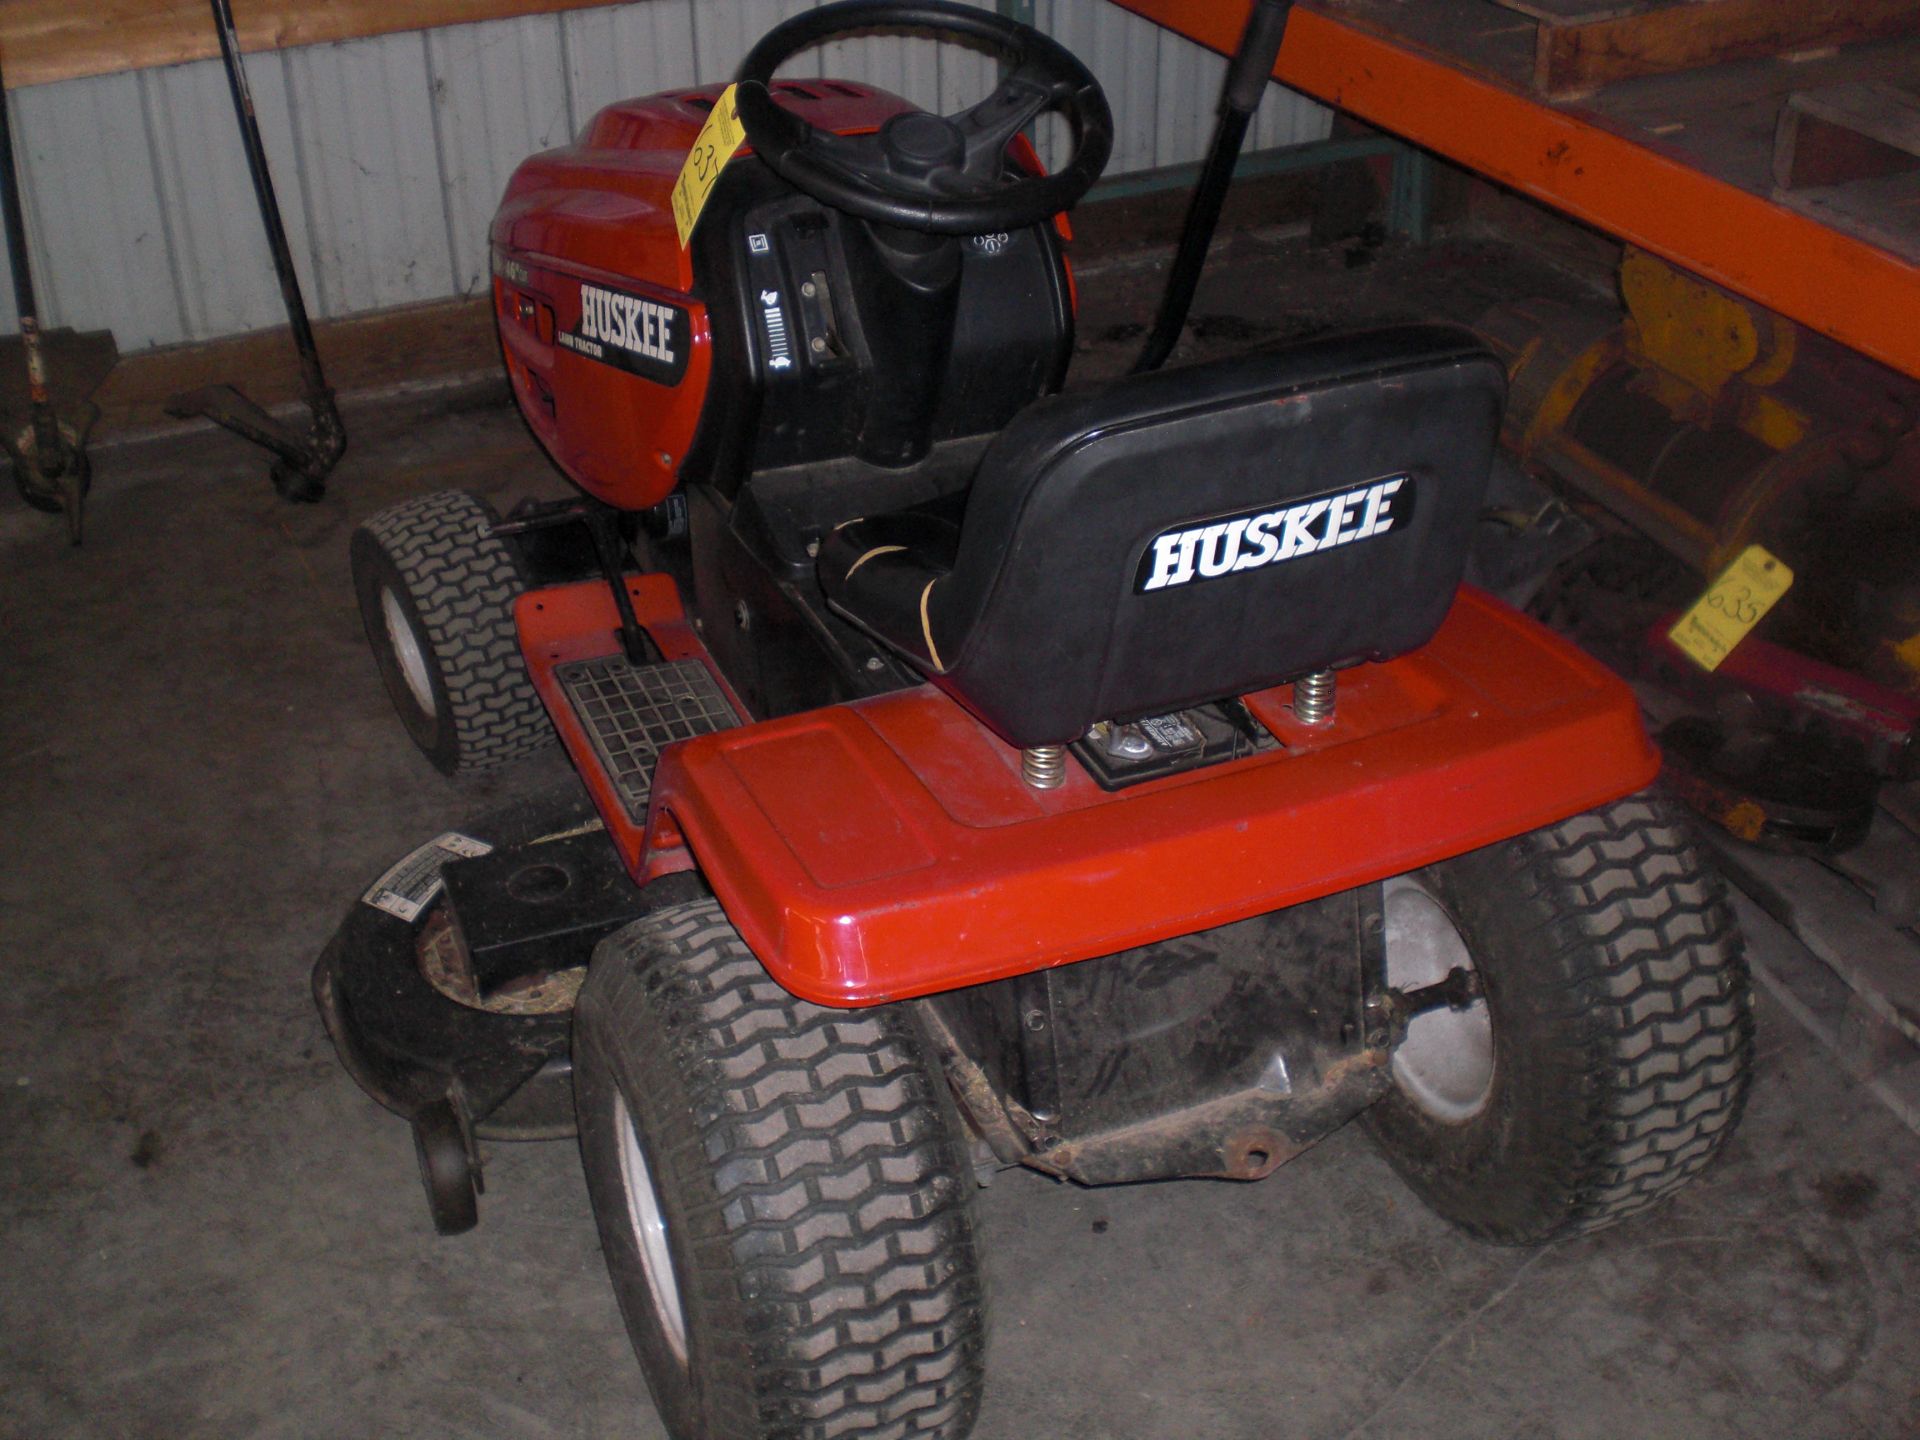 Huskee 46 In. Cut, 21 HP Lawn Tractor - Image 2 of 4